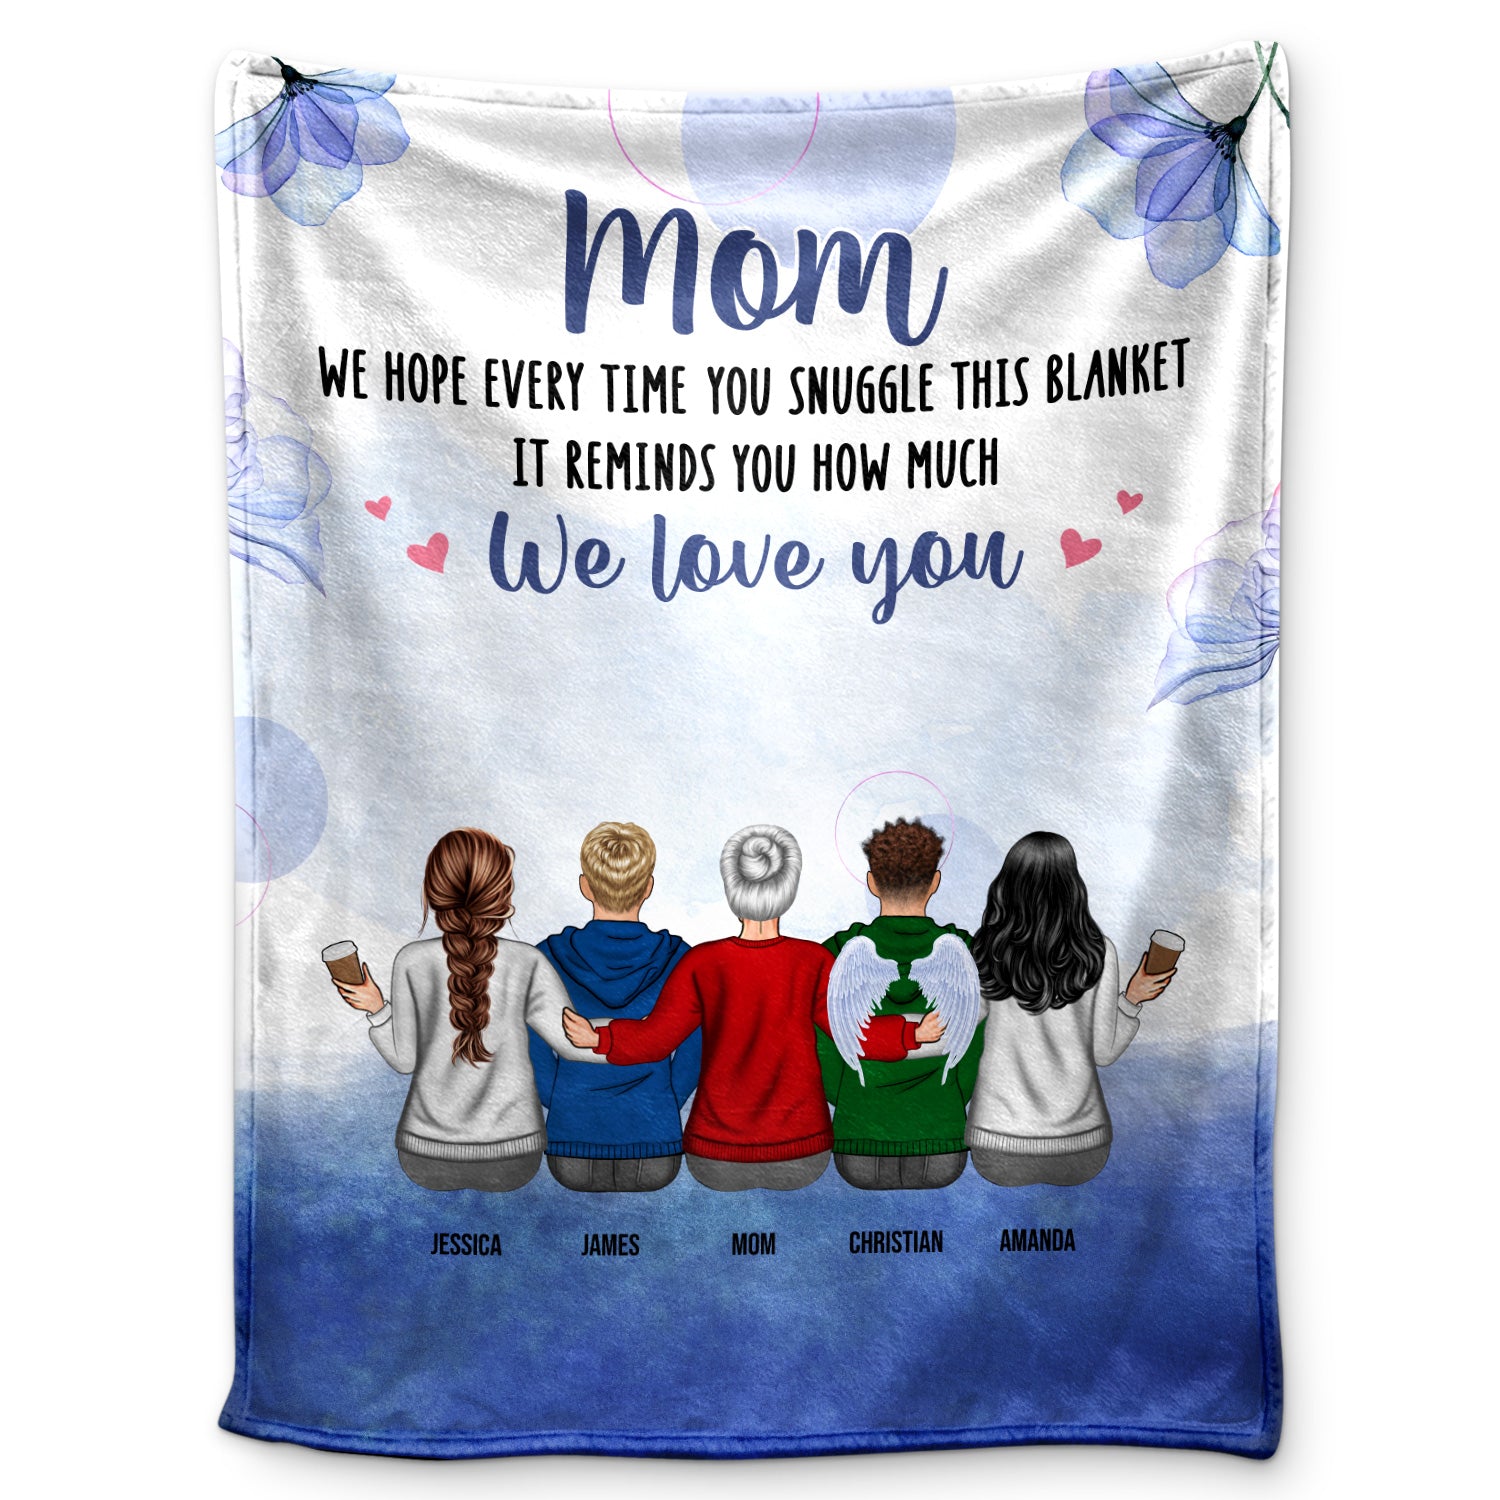 We Hope Every Time You Snuggle This Blanket - Gift For Mom, Grandma - Personalized Custom Fleece Blanket